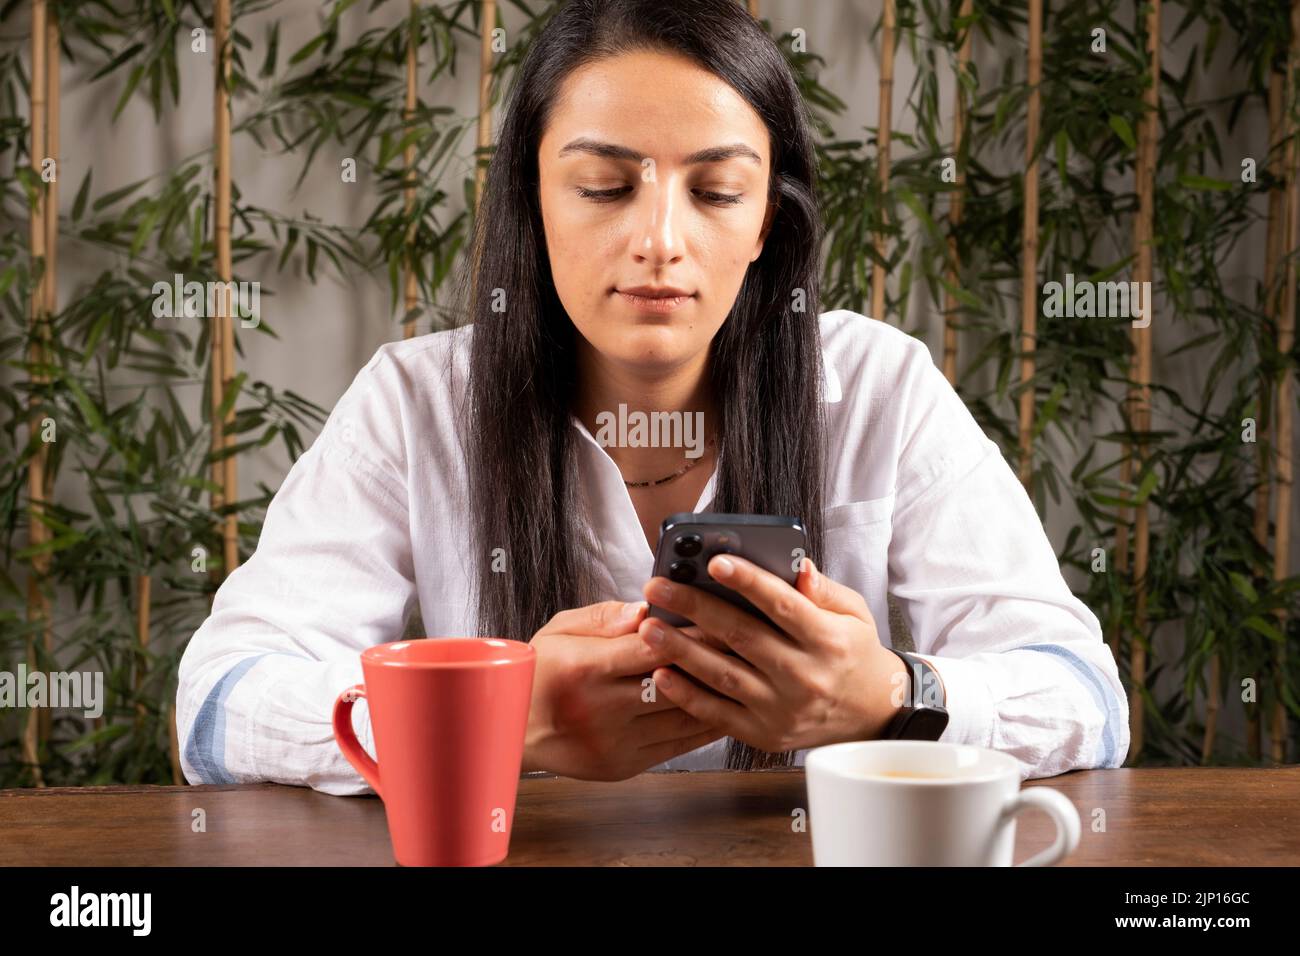 Using smartphone, front view portrait of young woman sitting at cafe and using smartphone. Little bored face expression, looking social media. Stock Photo